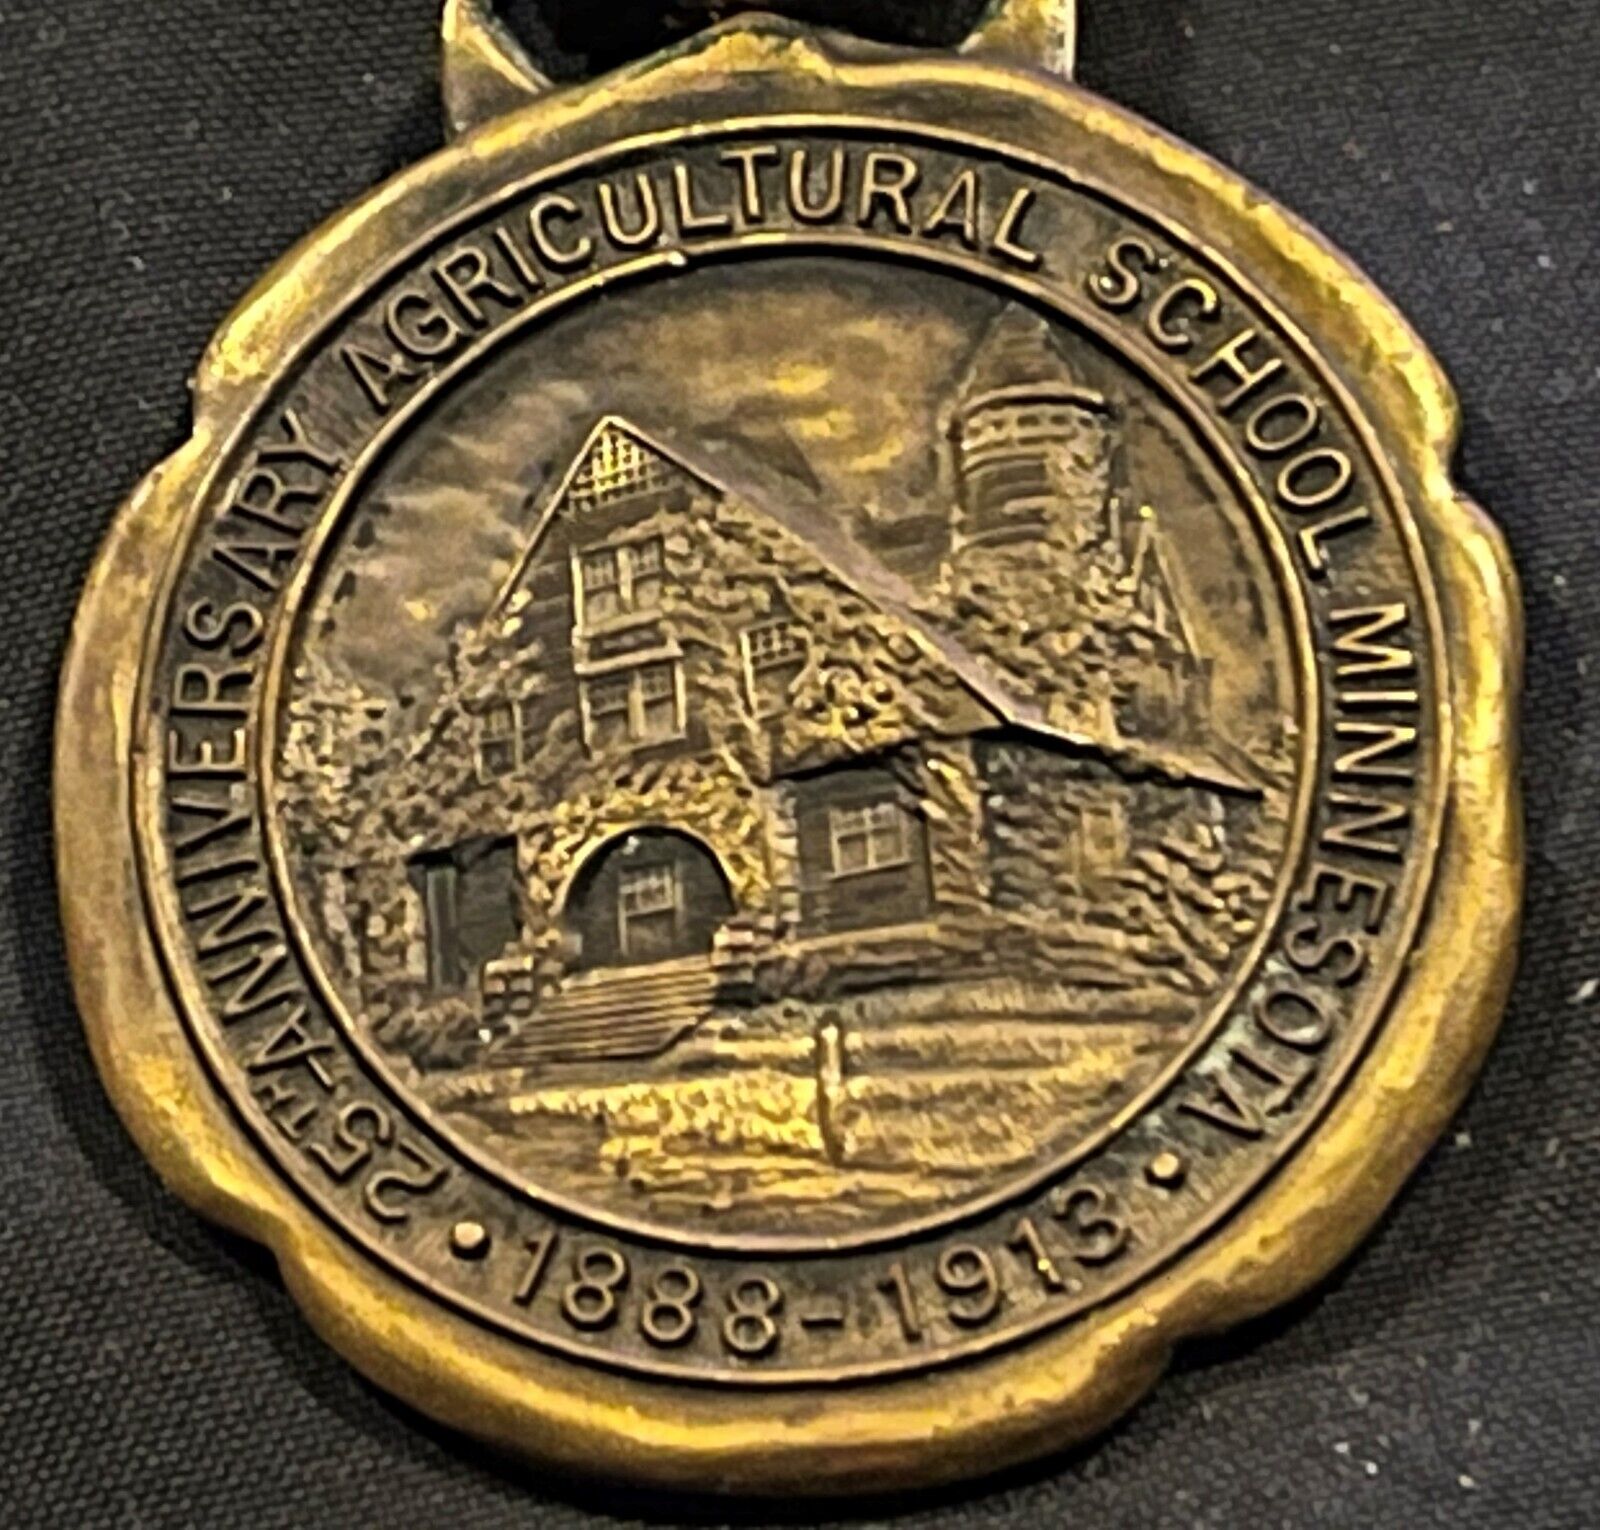 Vintage 1888 1913 AGRICULTURAL SCHOOL OF MINNESOTA 25TH ANNIVERSARY MEDAL & FOB